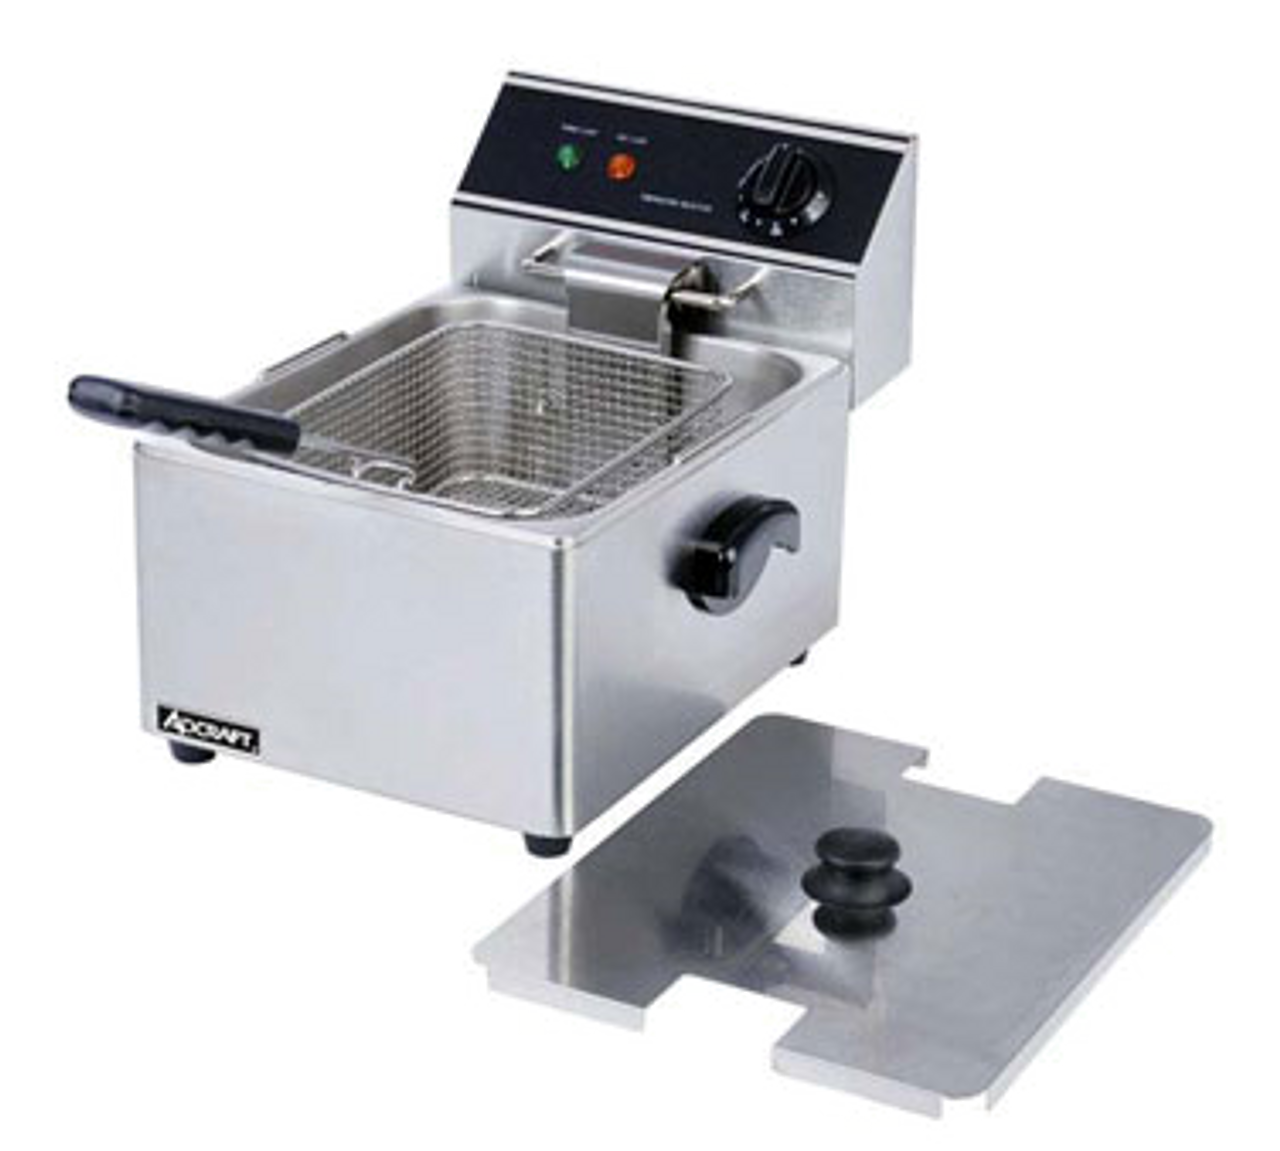 Countertop Deep Fryer, 11-3/4" x 16" x 11-1/4", single, electric, 6 liter, 15 lb. per hour cooking capacity, 1 fryer basket with a collapsible heat-resistant handle, thermostatic control, temperature range from 120°F to 375°F, side handles, inside calibration marks, protective wire grate, heavy duty stainless steel construction, 6' grounded cord, 120v/60/1-ph, 4.5 amps, 1750 watts, NEMA 5-15P, NSF, UL